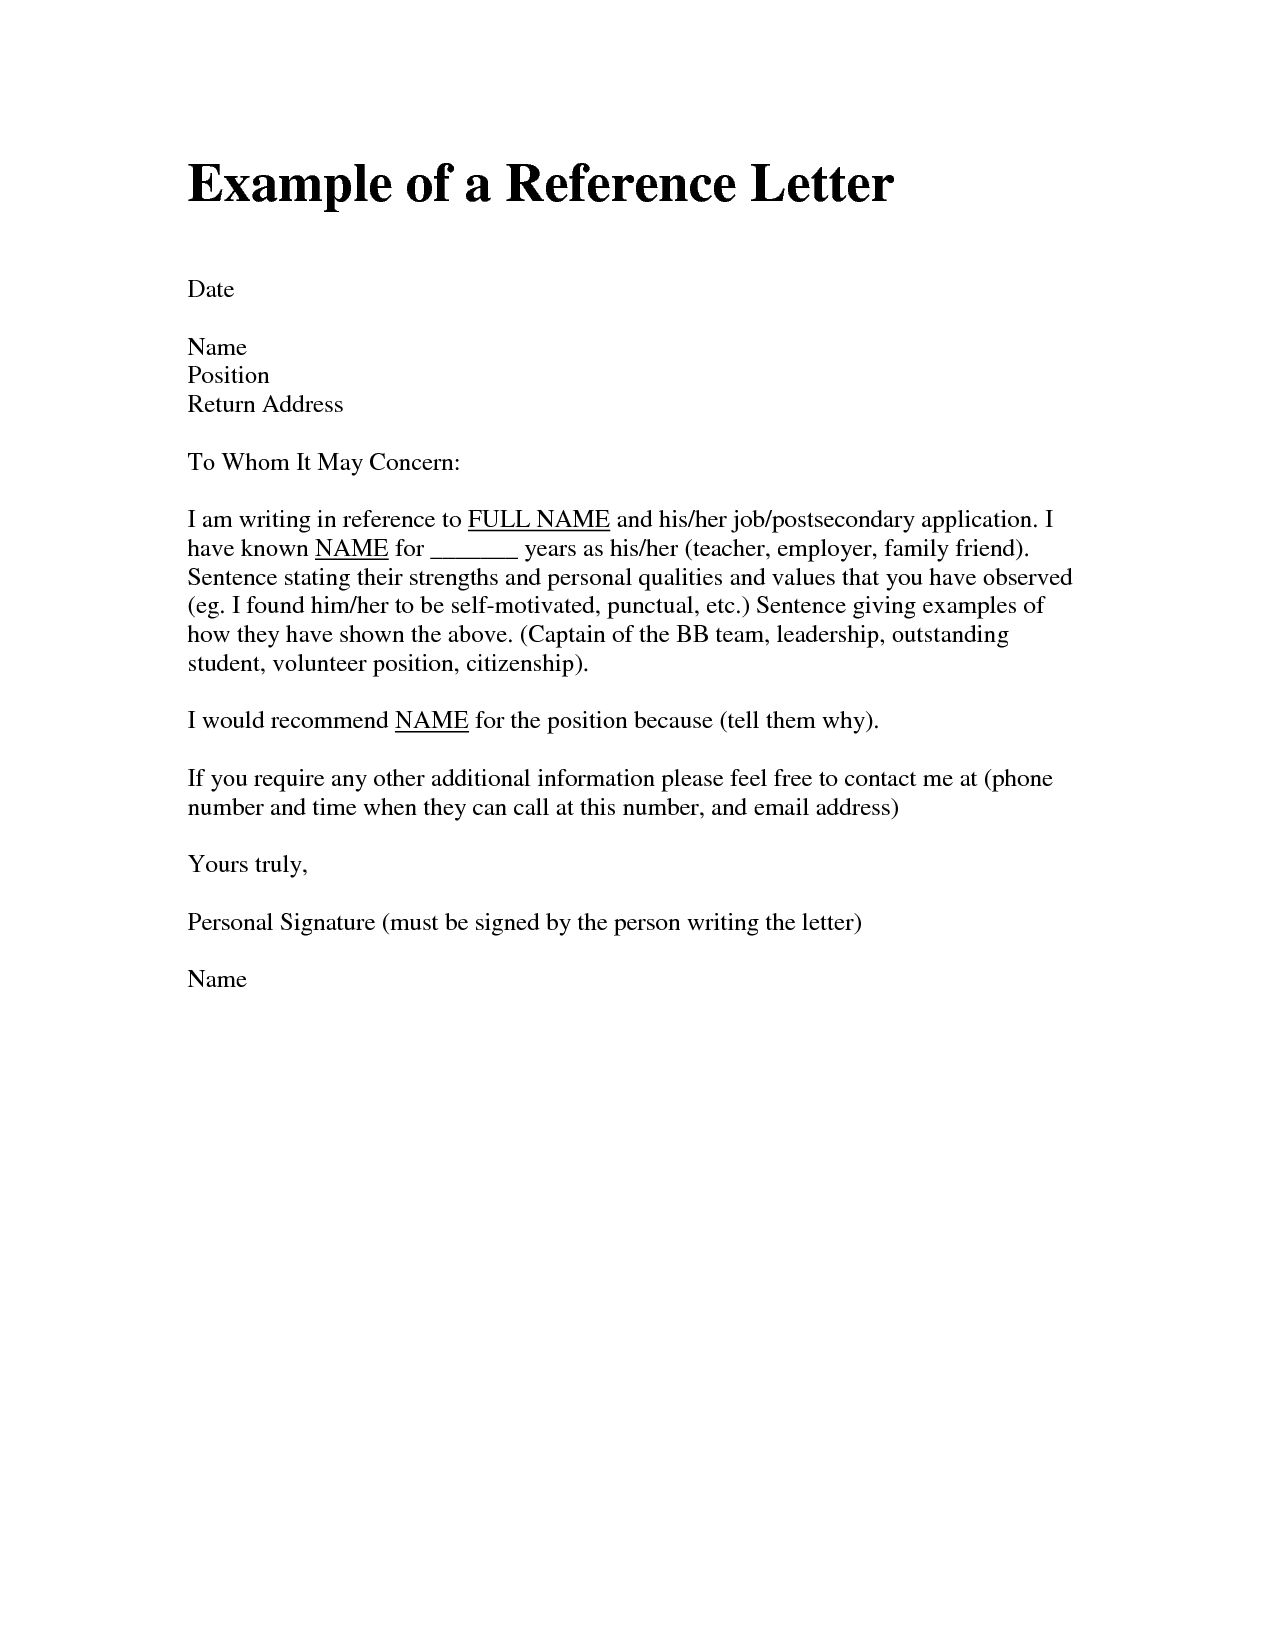 Sample Recommendation Letter For Friend Ivedipreceptivco within dimensions 1275 X 1650